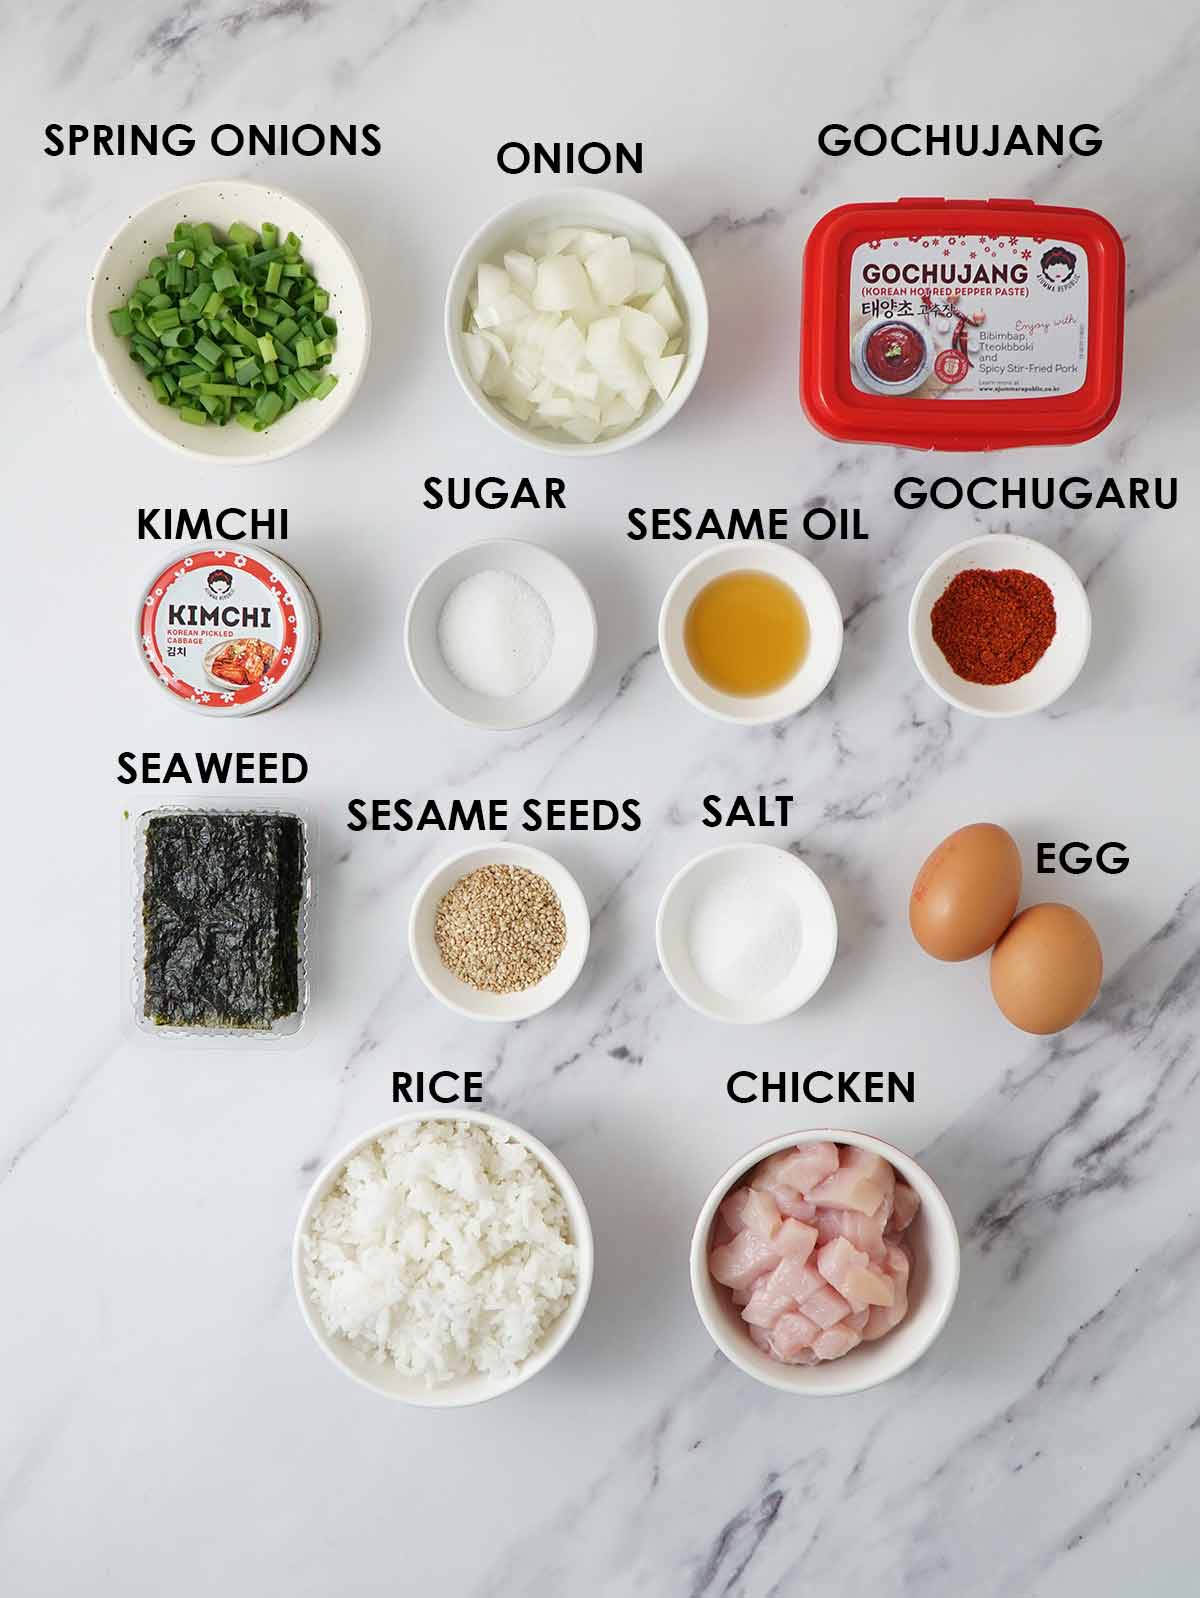 Labelled stir fry ingredients, garnish and toppings for kimchi fried rice. 